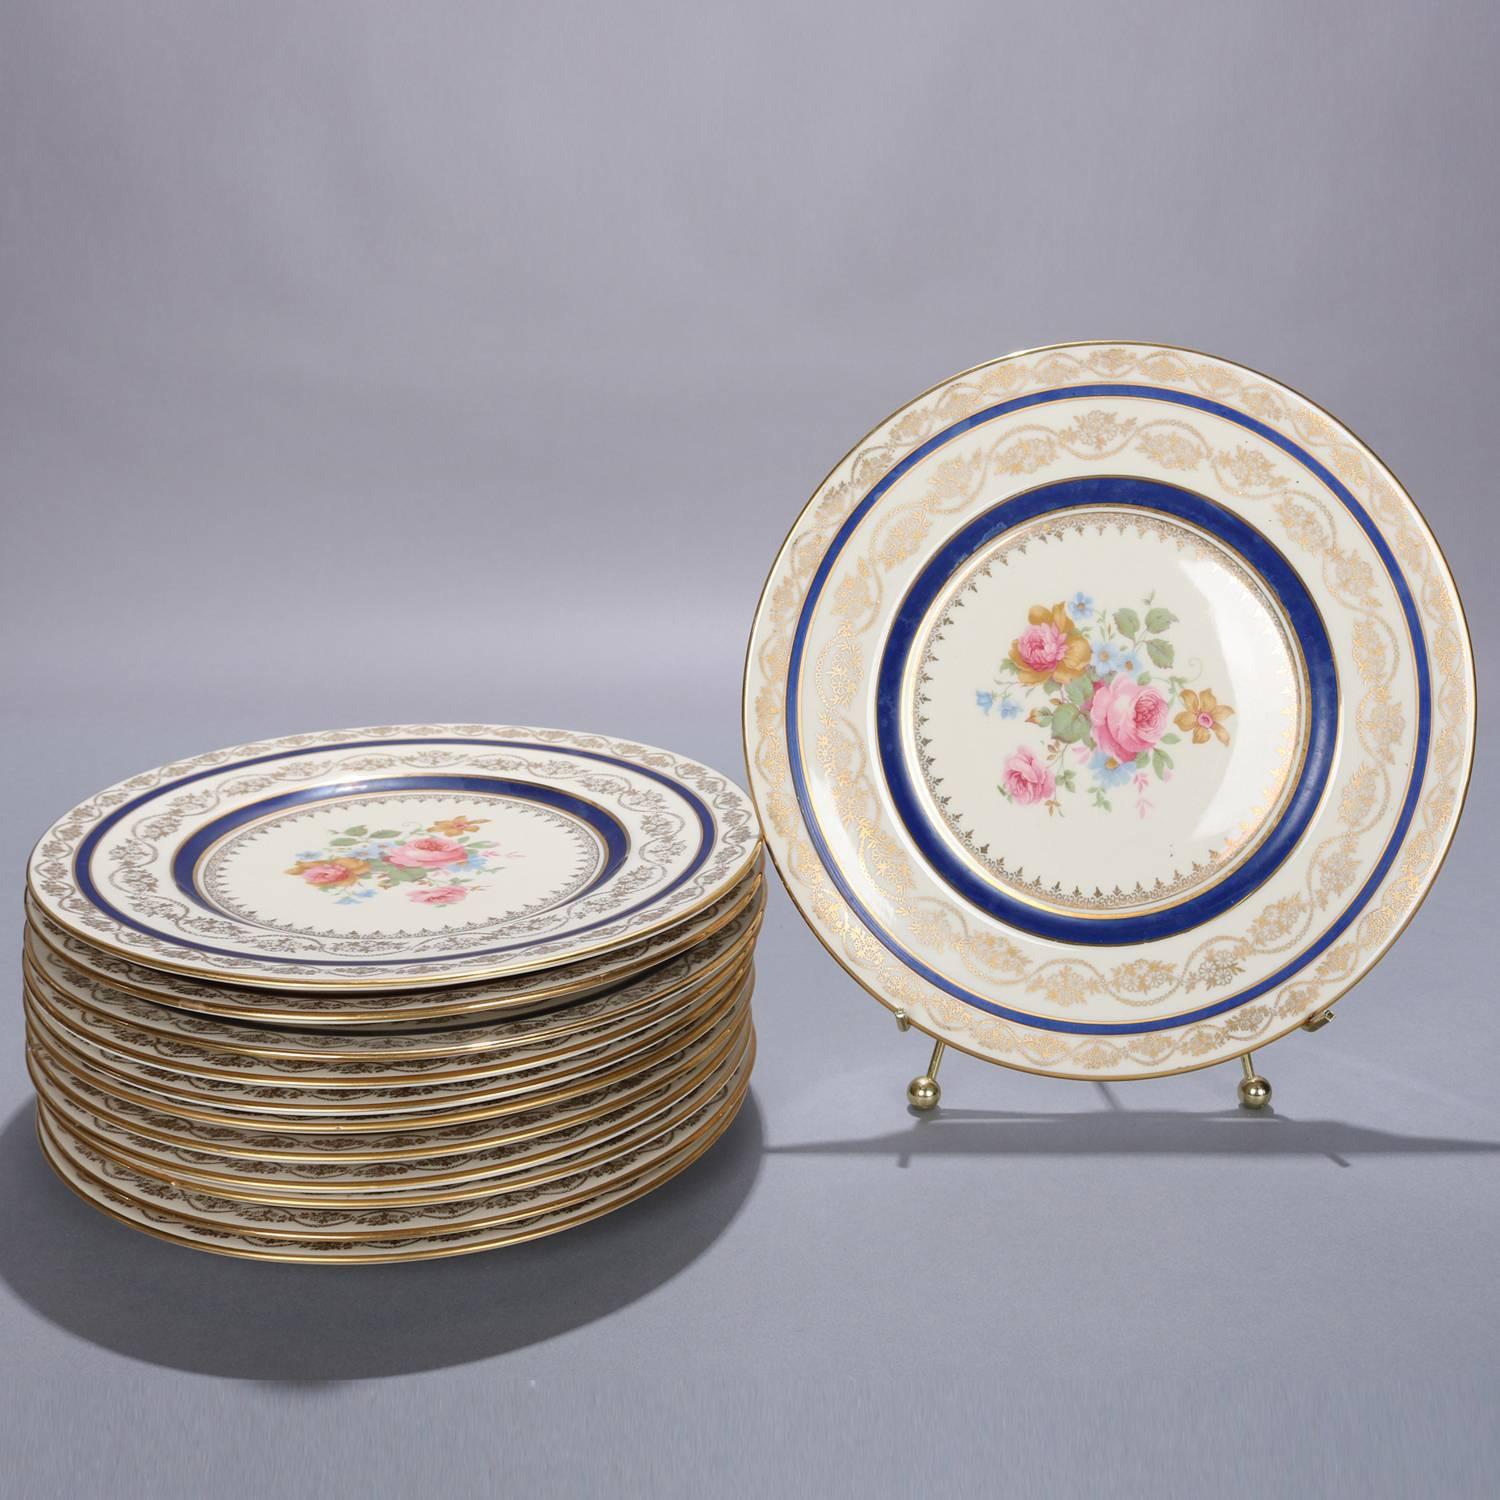 Set of 12 porcelain plates by Transulcent China dinner plates feature central rose floral bouquet with 22-karat gold gilt foliate filigree rim and having cobalt blue, 20th century

Measures: .75